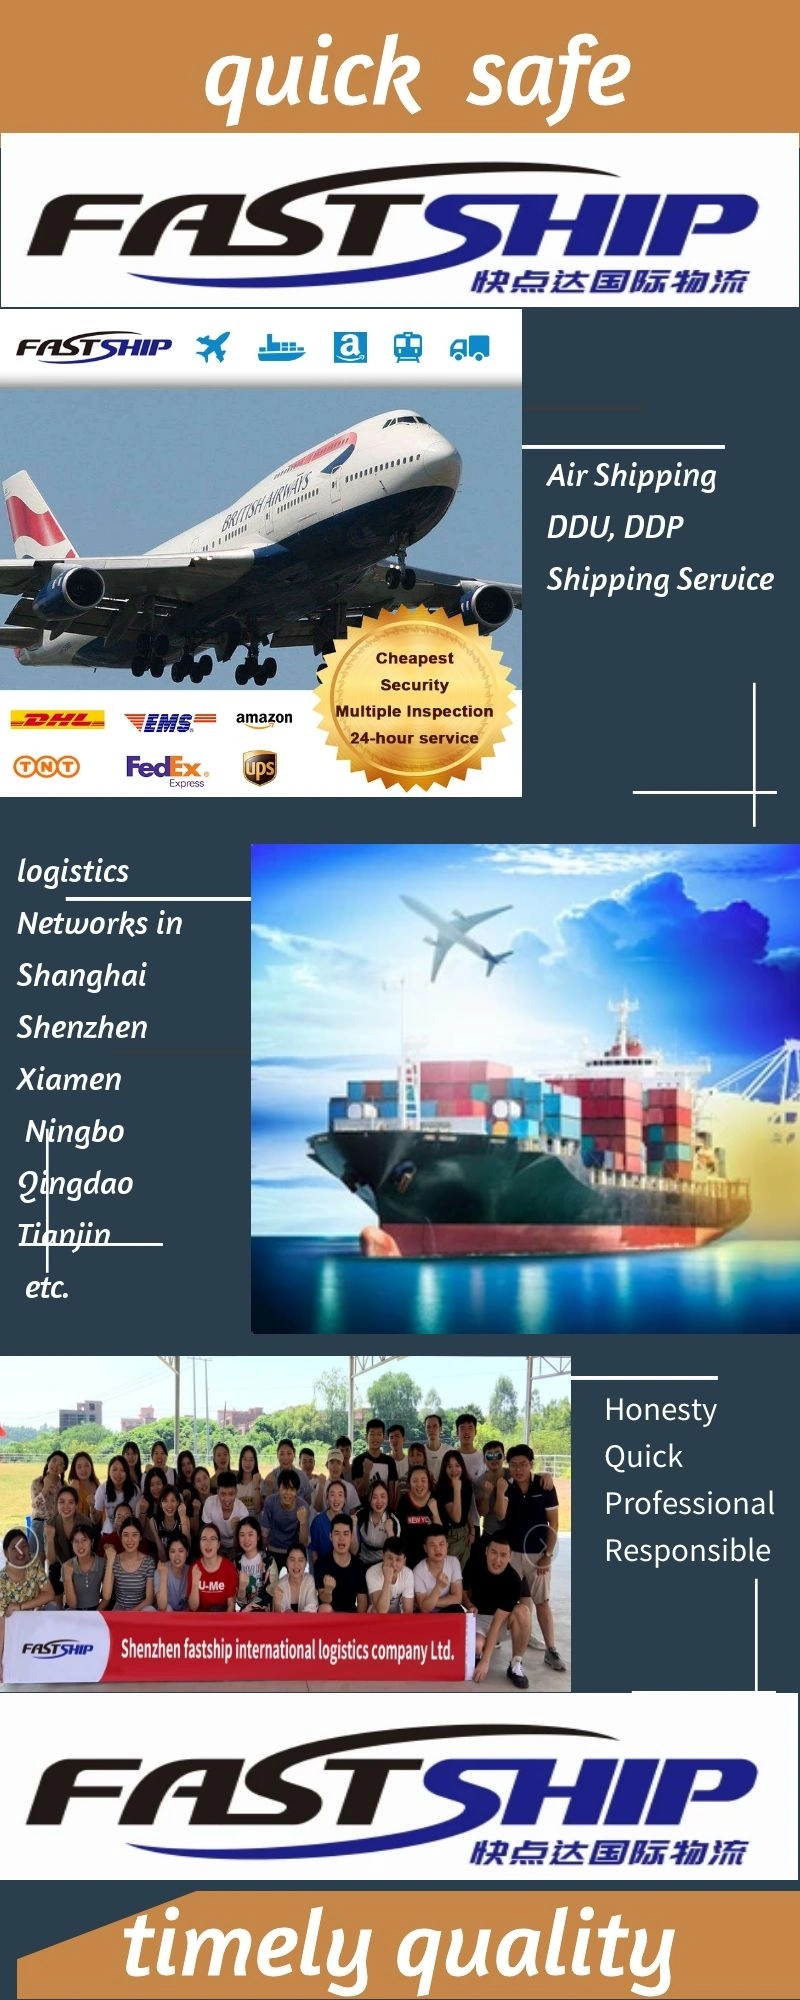 Rate Shipping Sensitive Goods Fba Cheap Air Freight Agent From China to UK